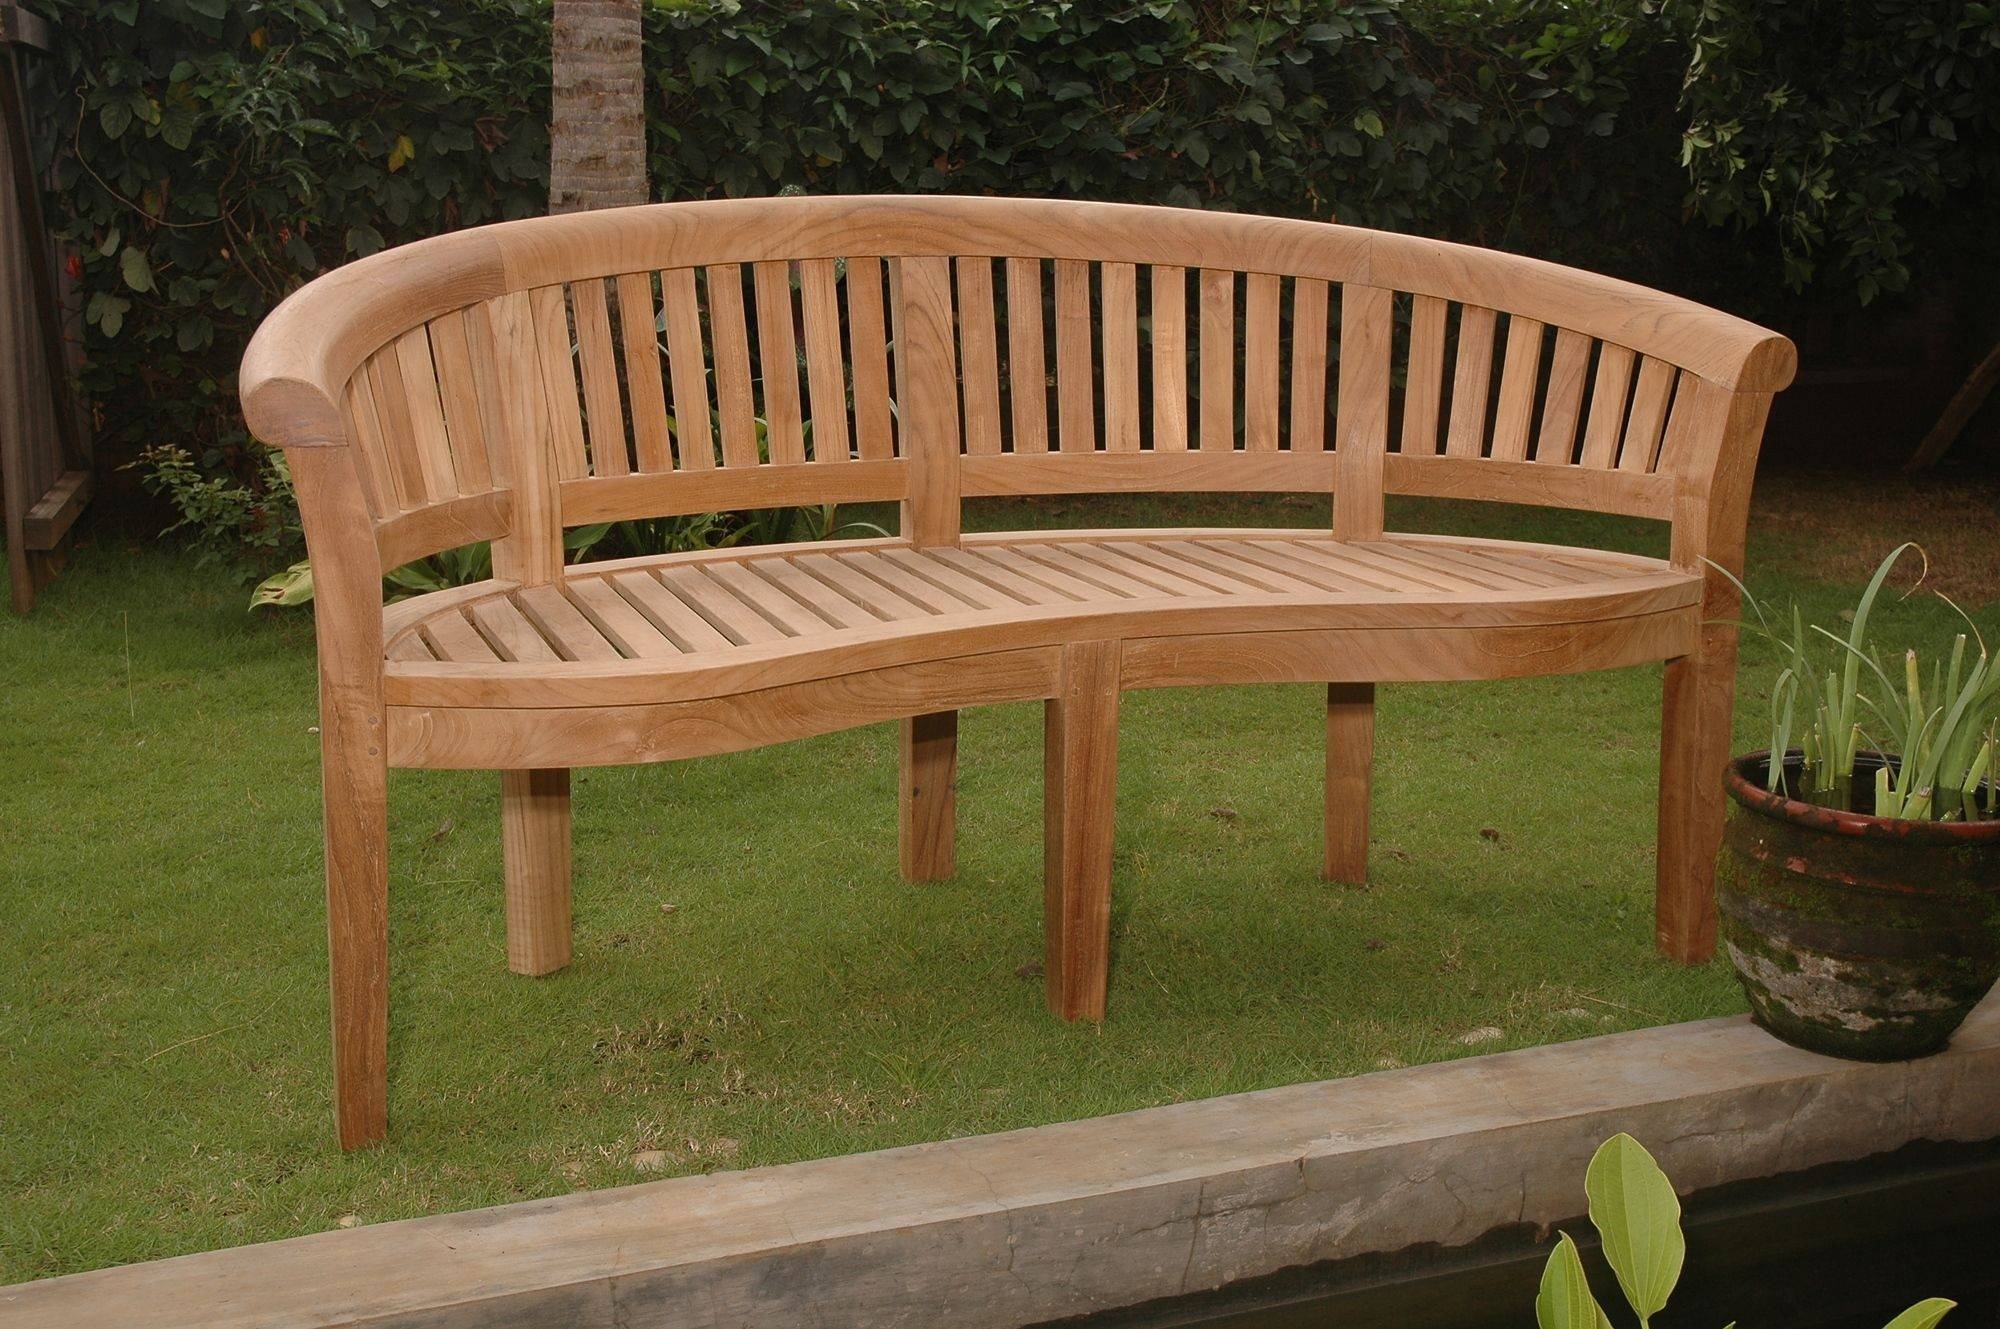 Cool Curved Garden Benches Wooden Design